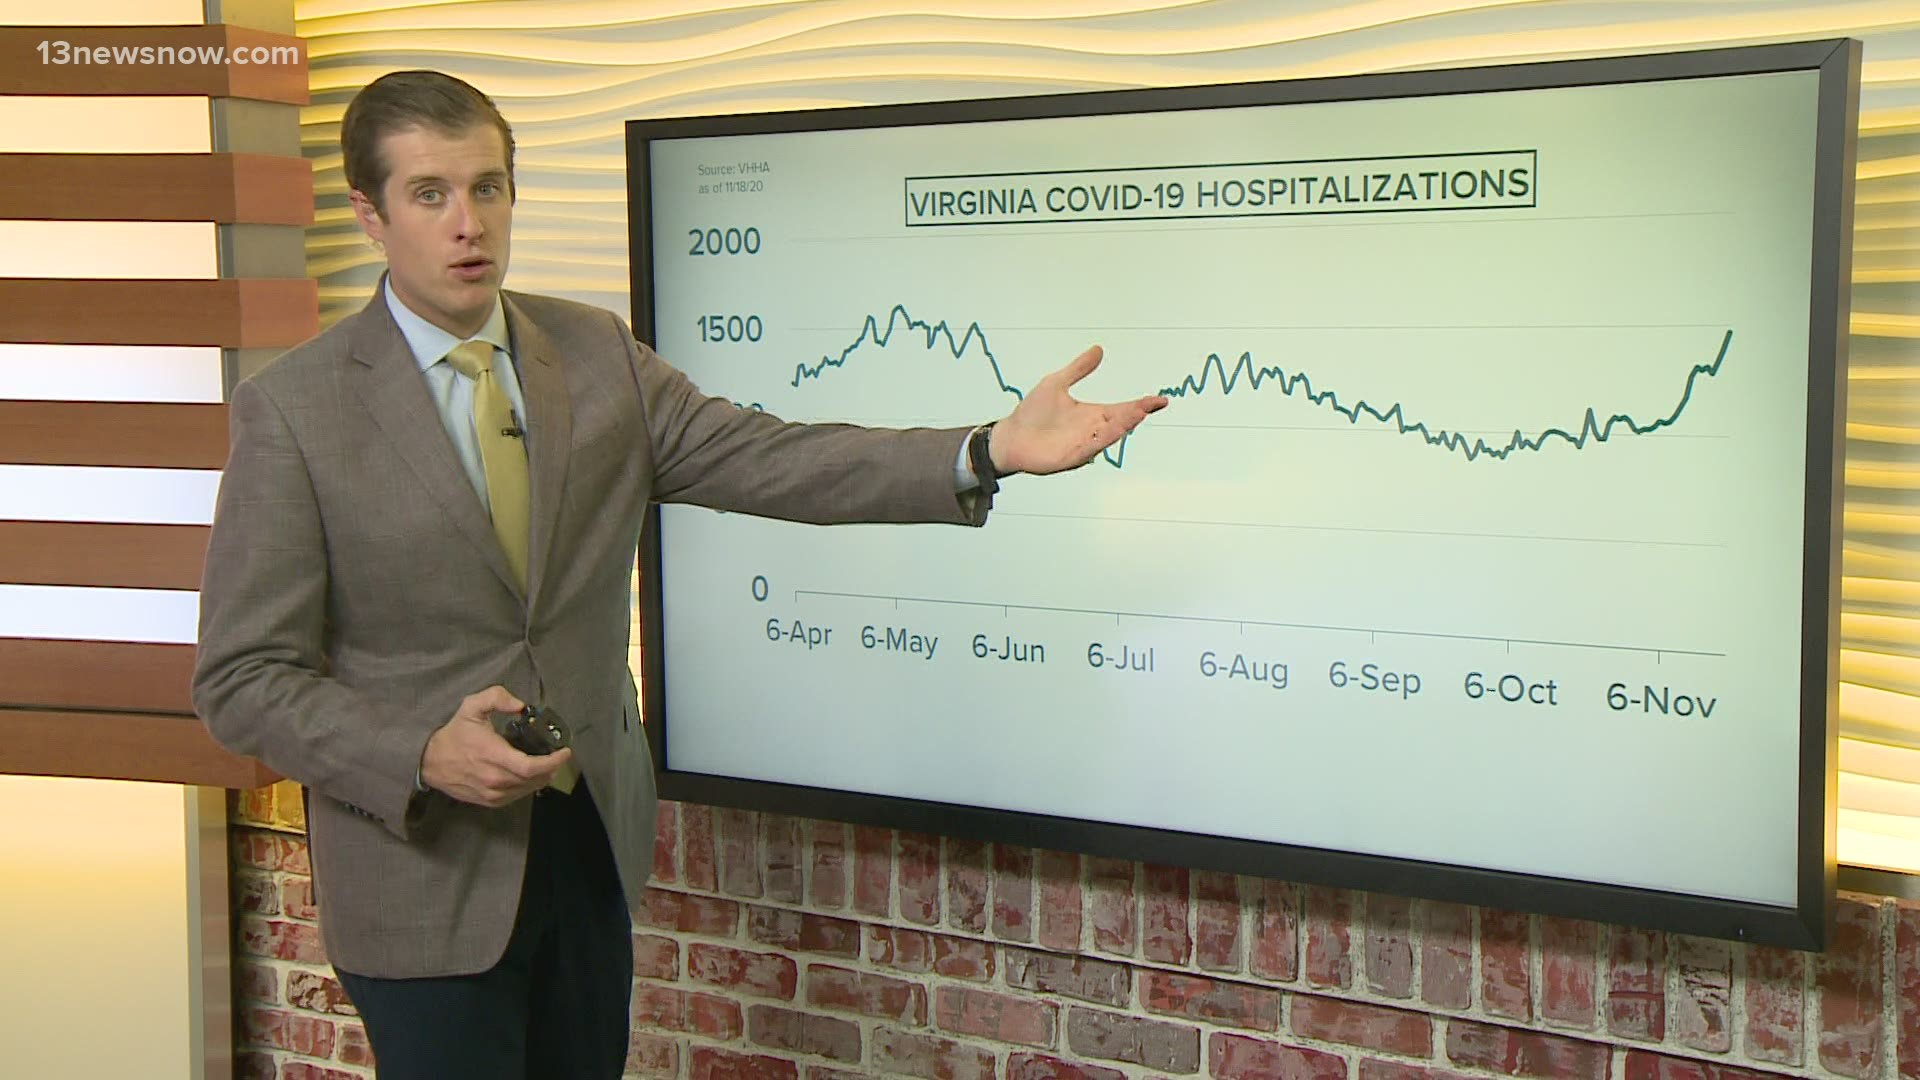 13News Now anchor Dan Kennedy breaks down the local and state COVID-19 health metrics as of November 18, 2020.